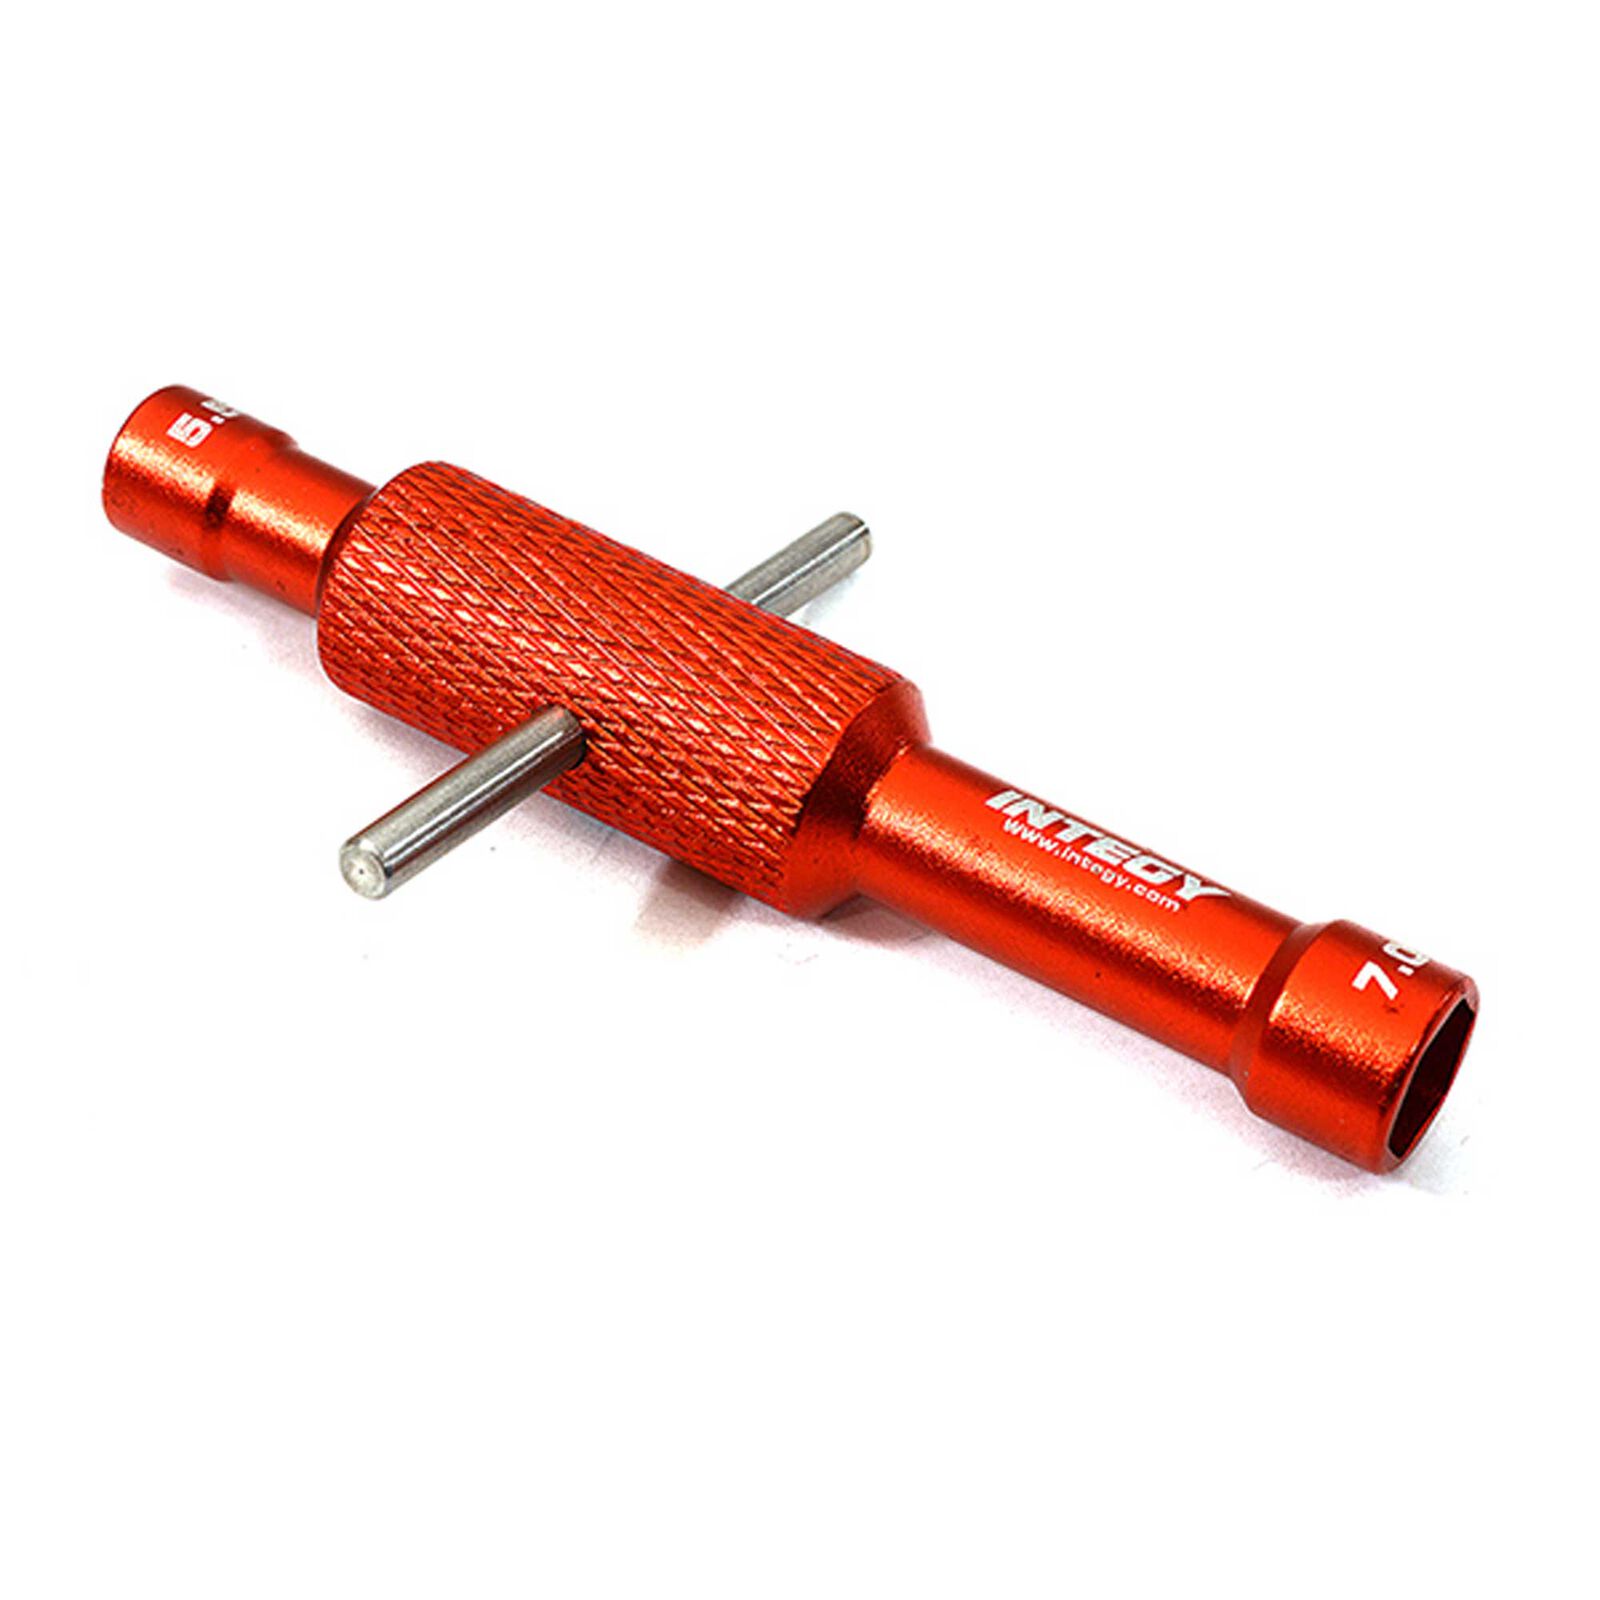 Dual Size Hex Socket Wrench 5.5mm + 7.0mm